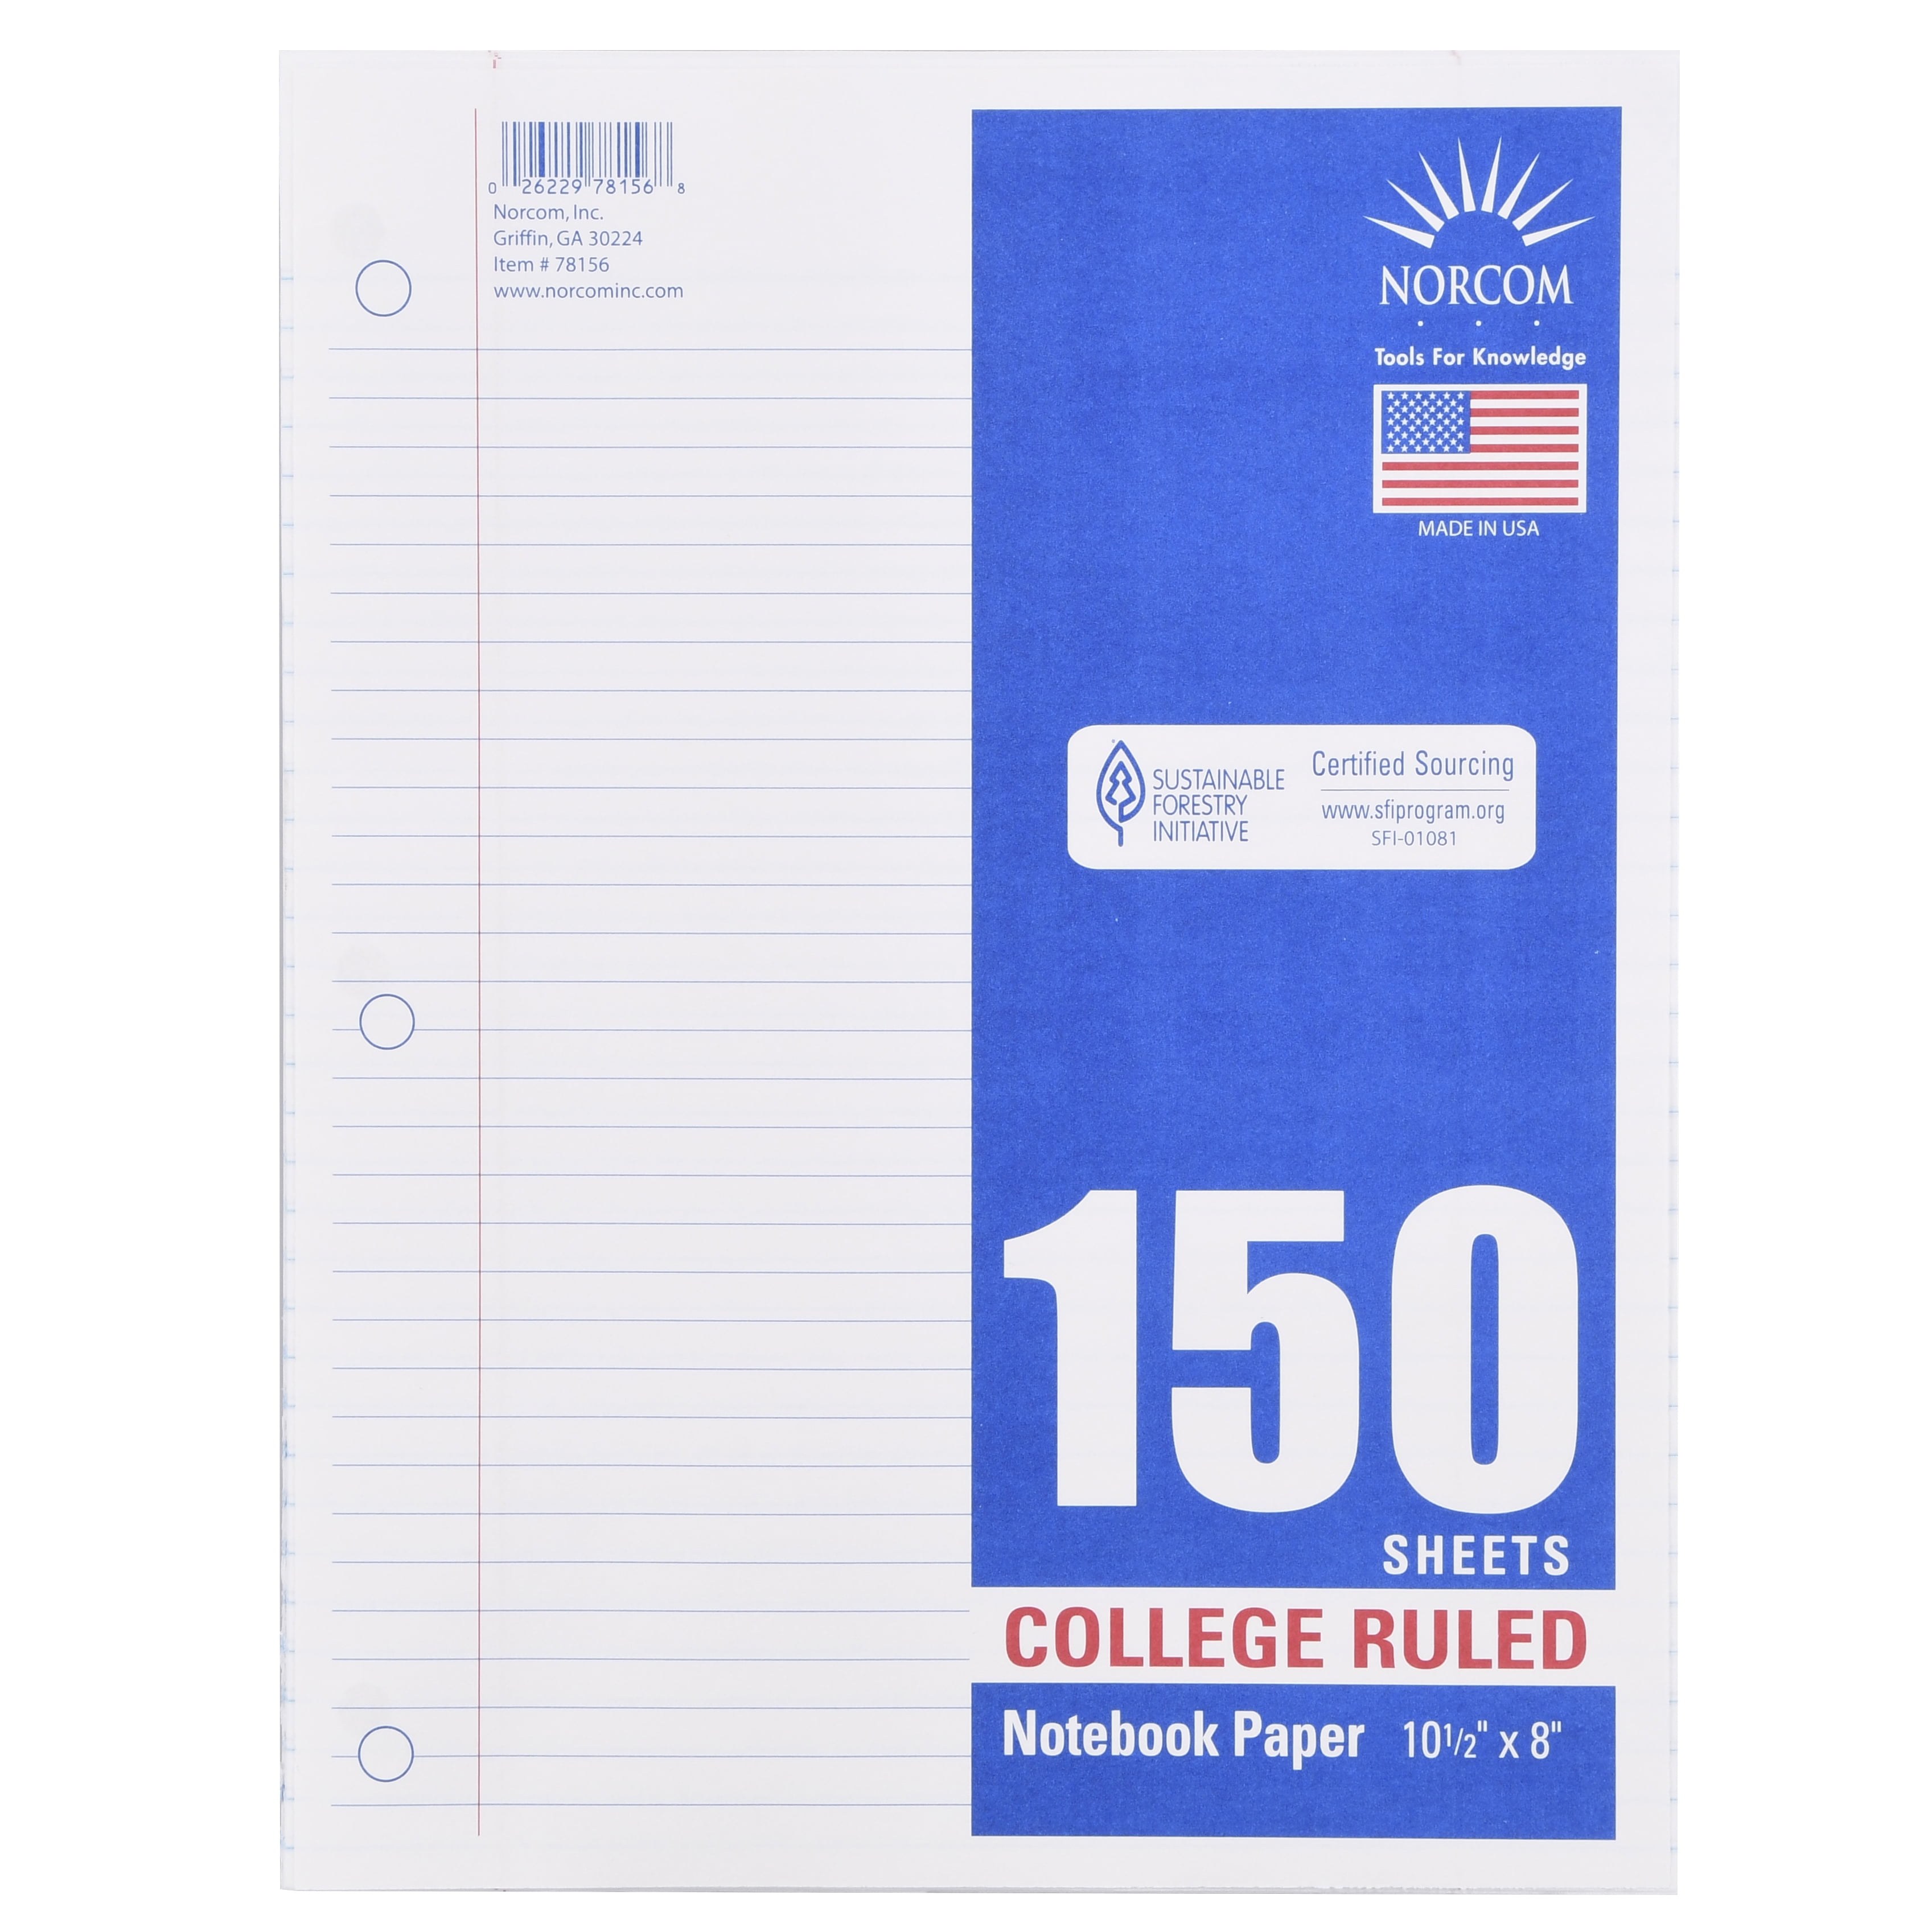 Details about   Office Depot Value College Ruled Notebook Filler Paper 150 Sheets 10.5" x 8" 